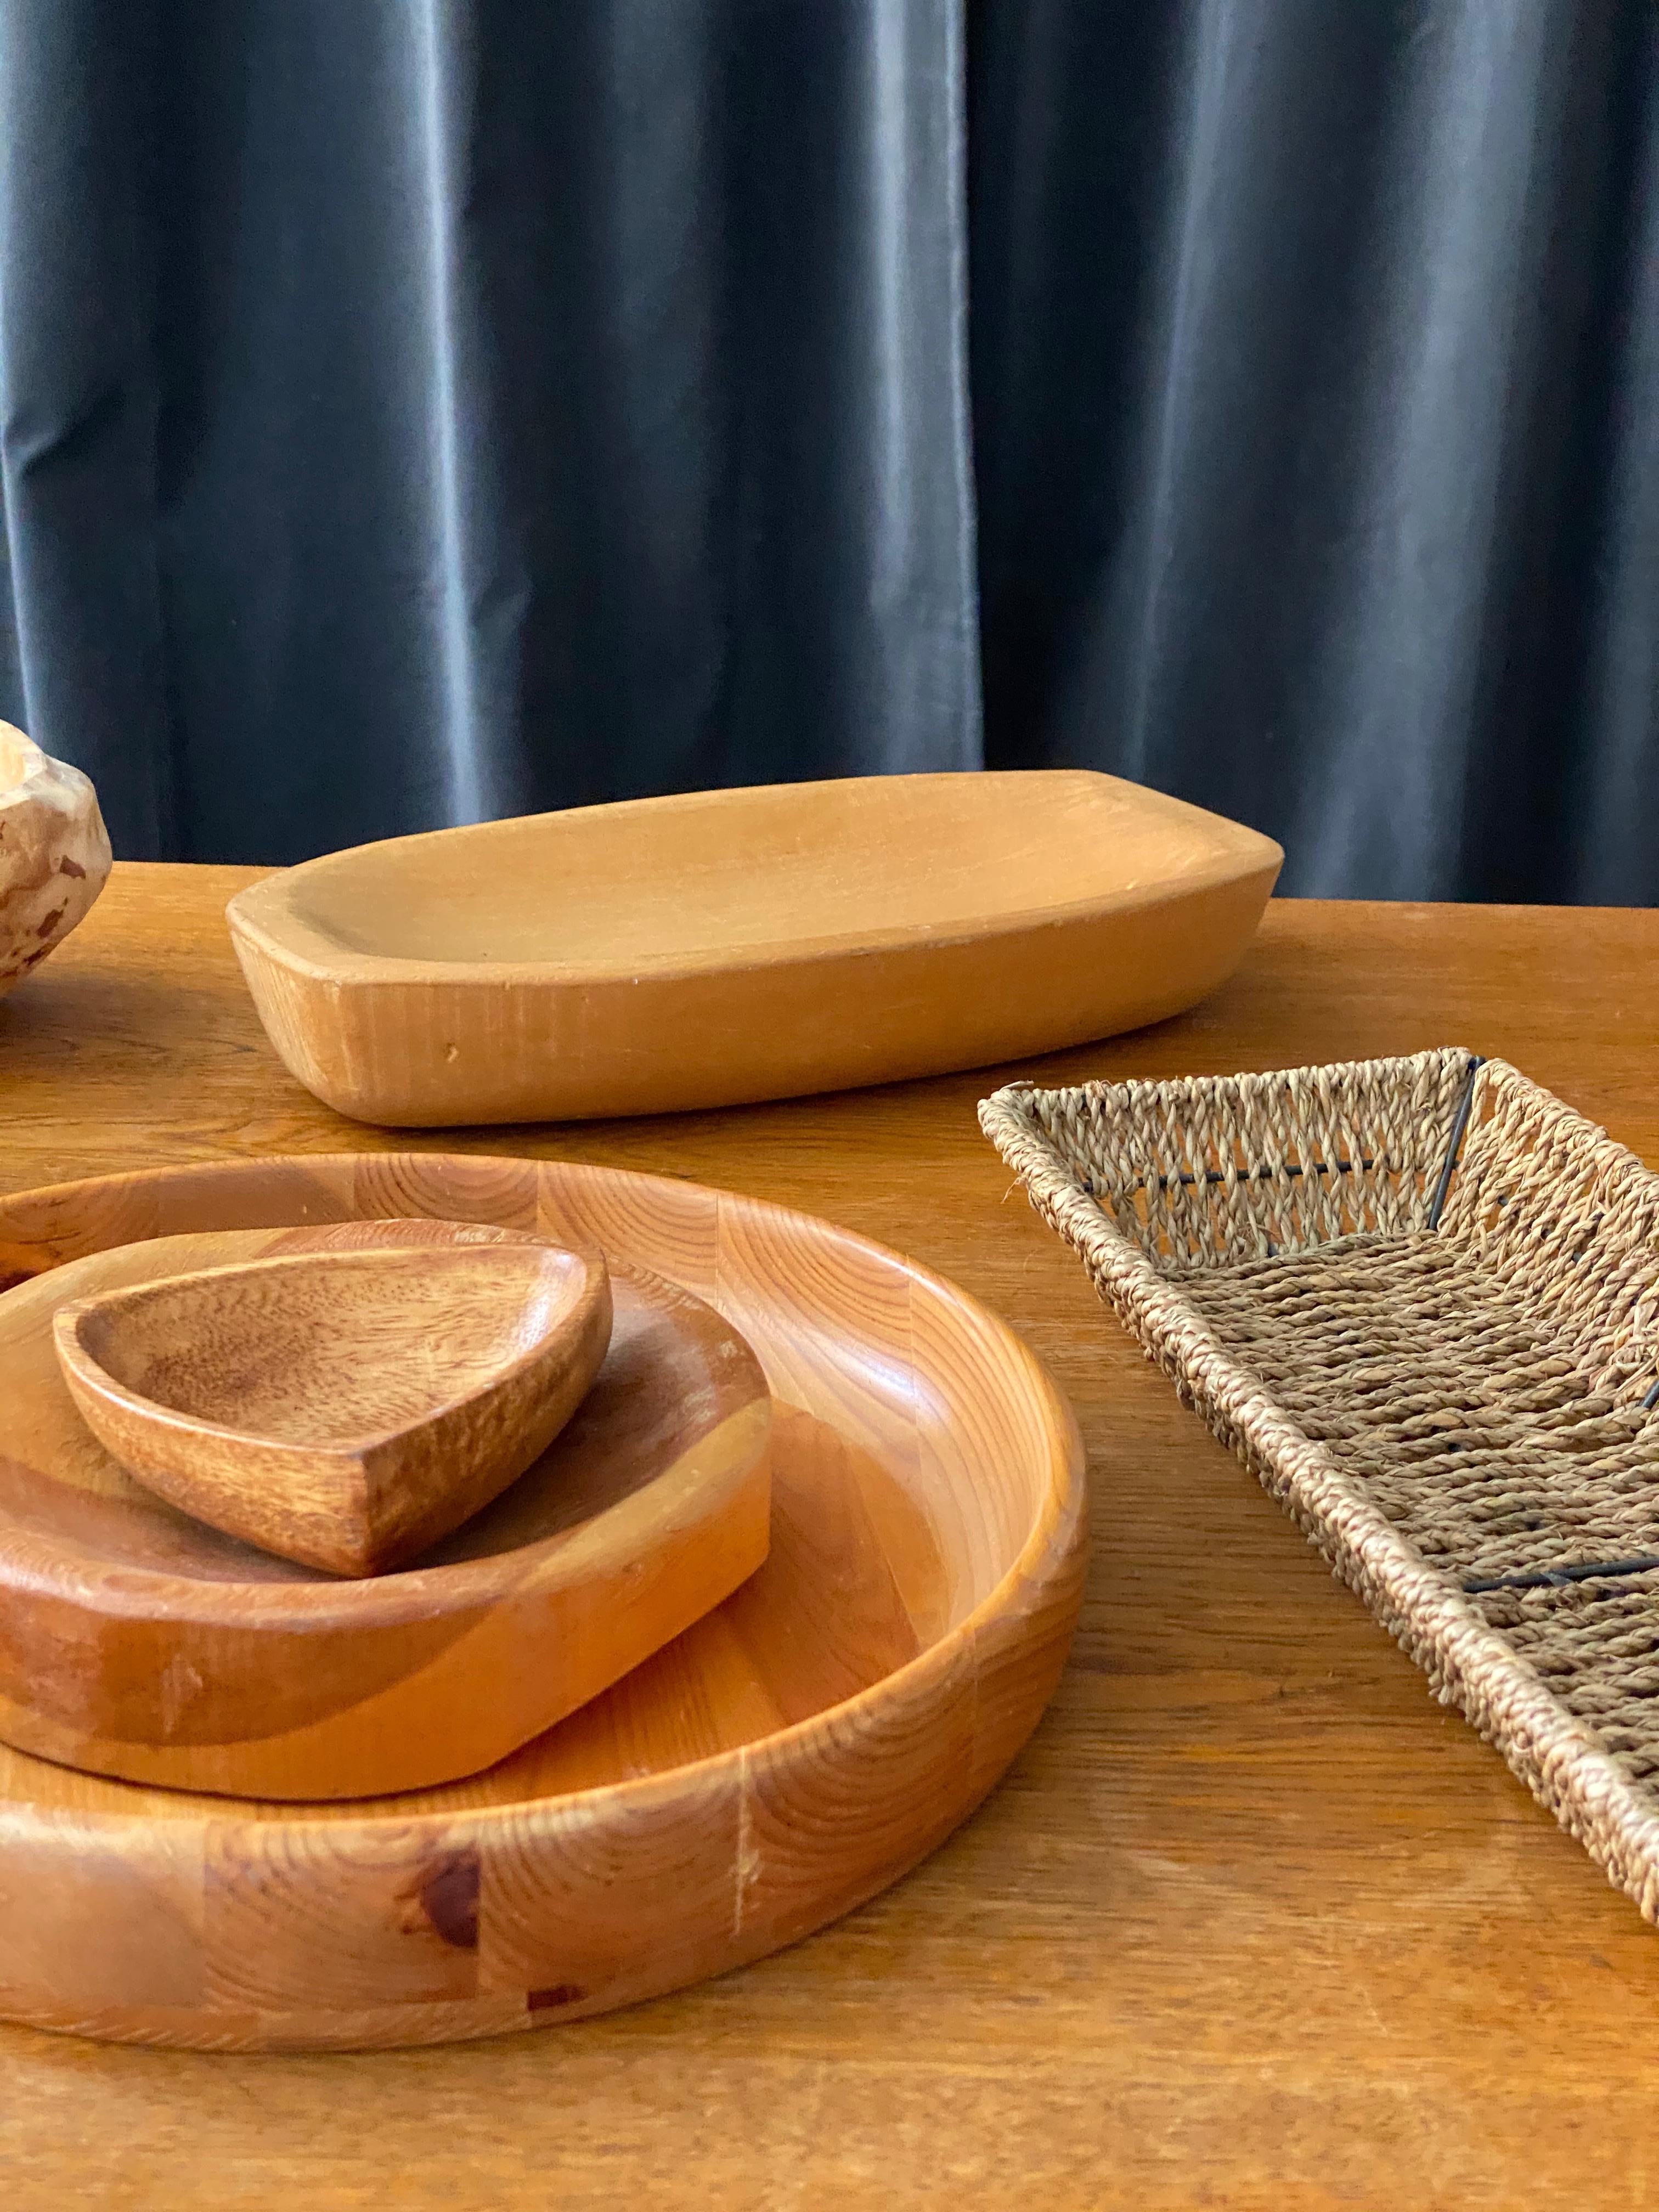 Mid-Century Modern Swedish, Collection of Bowls, Dishes, Trays, Wood, Rope, Rattan, Midcentury